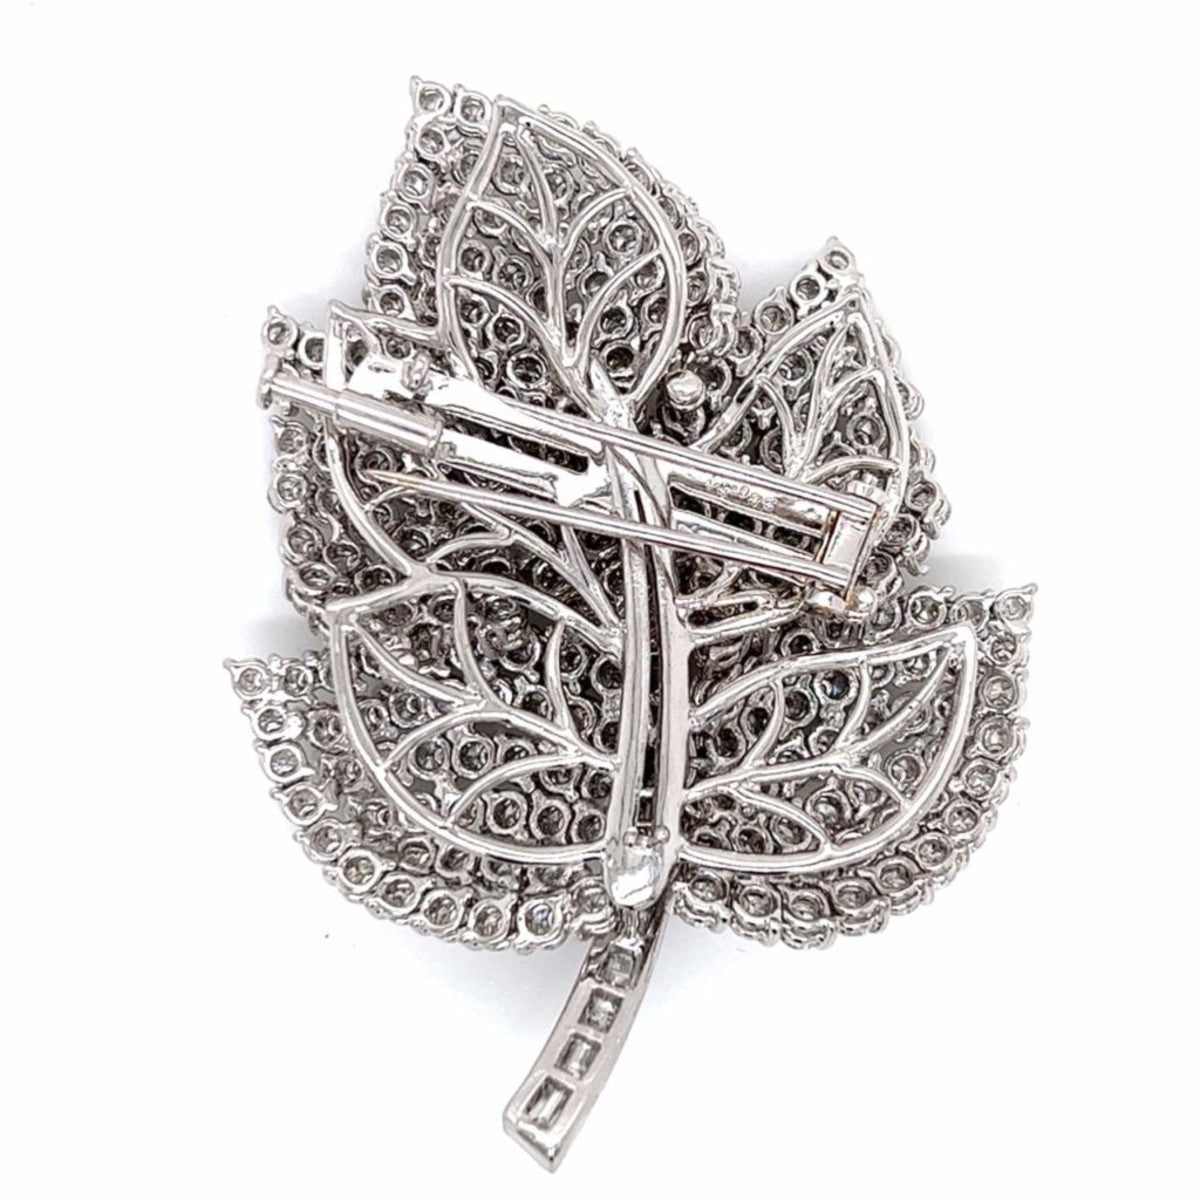 Post-1980s 18KT White Gold Diamond Leaf Brooch back view